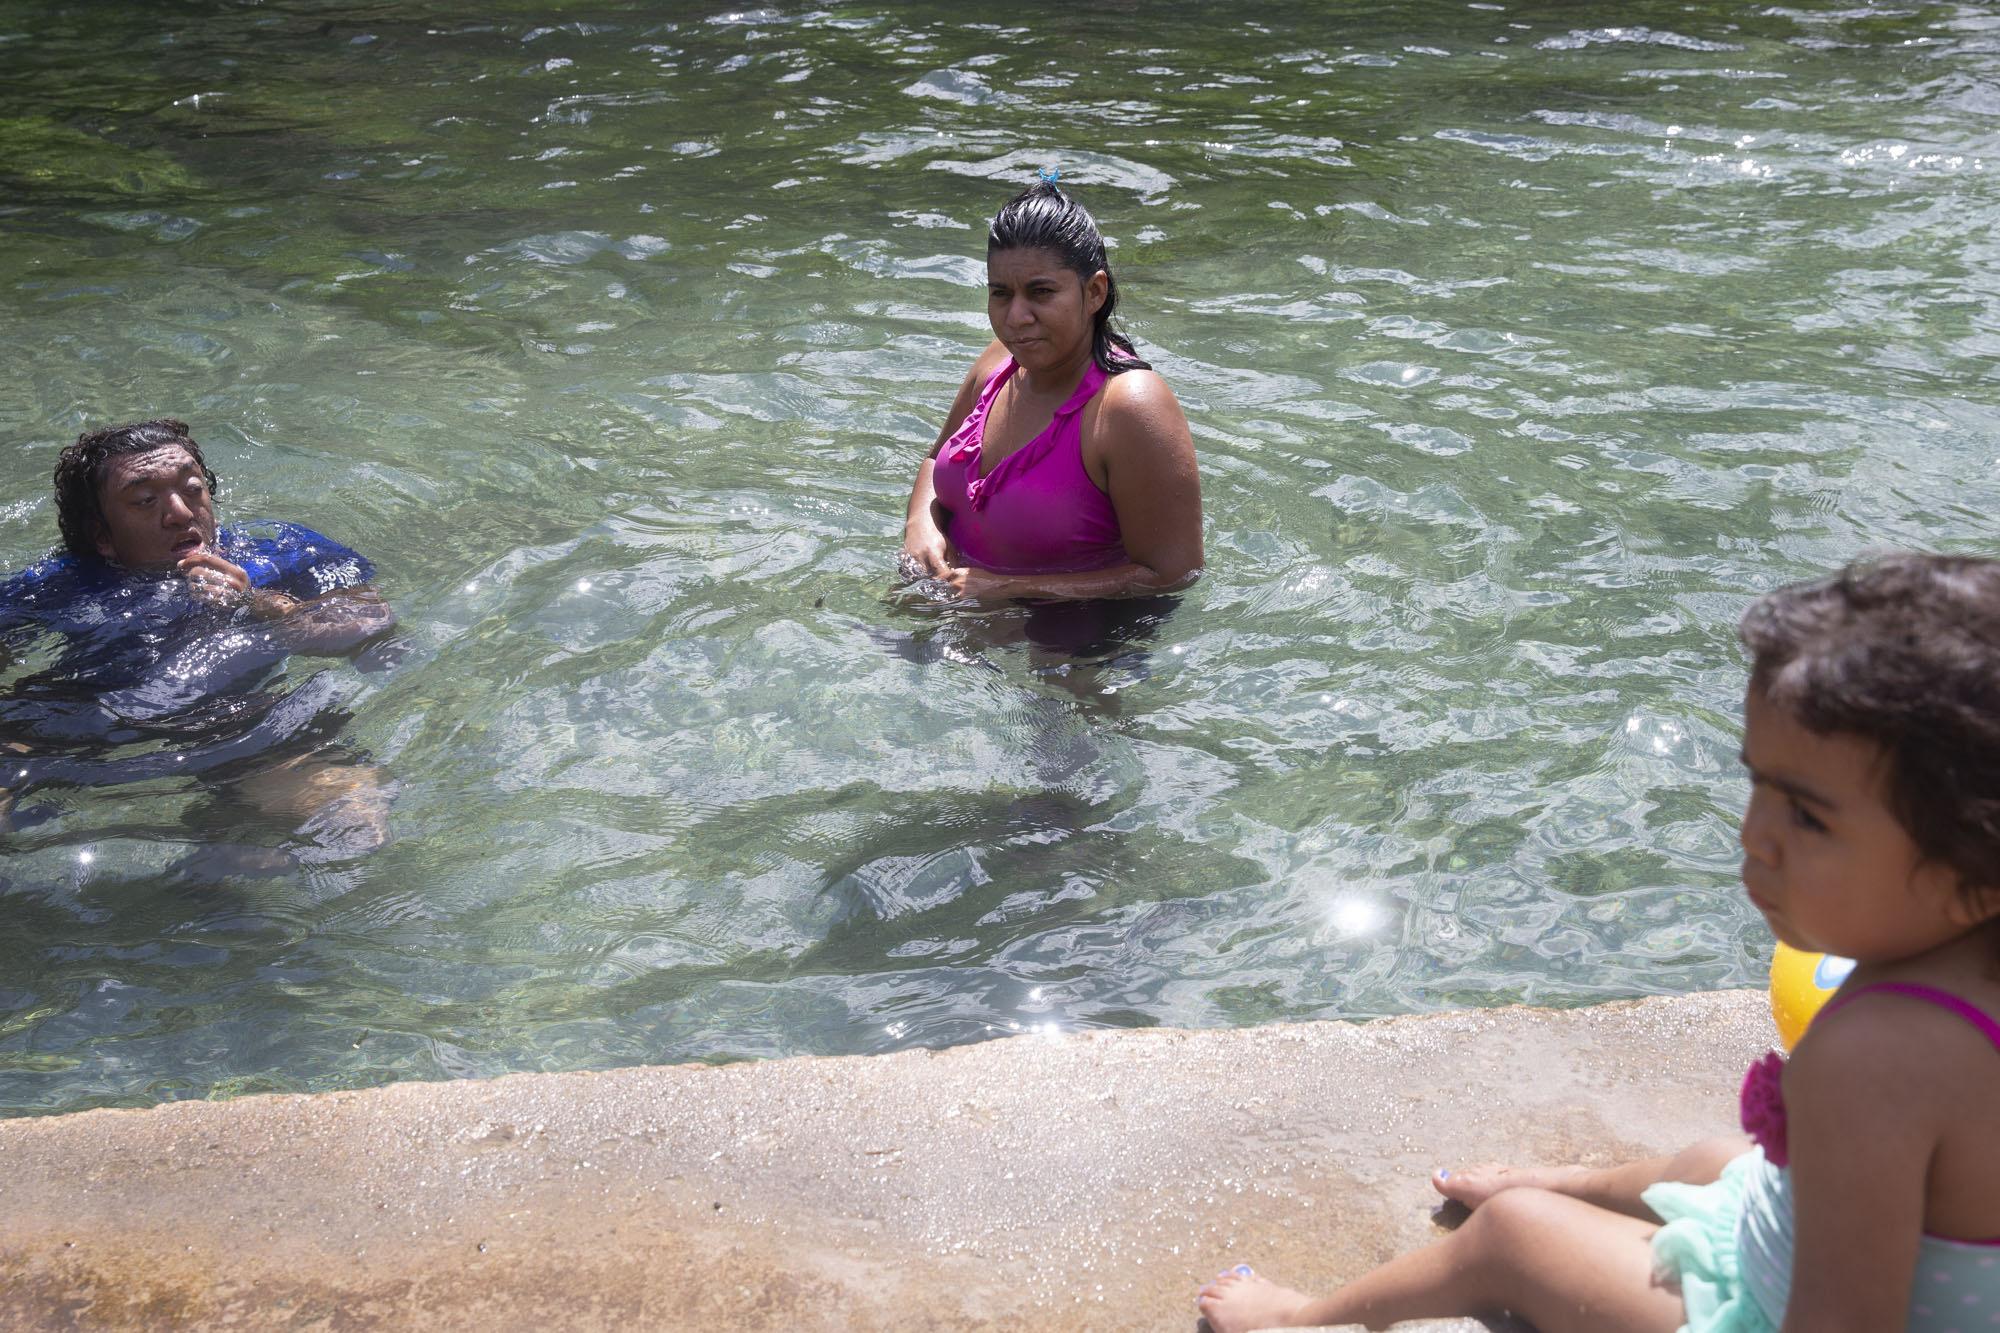  Lizeth Rosales, center, goes to the San Marcos river with her brother, left, and her 2-year-old daughter.  